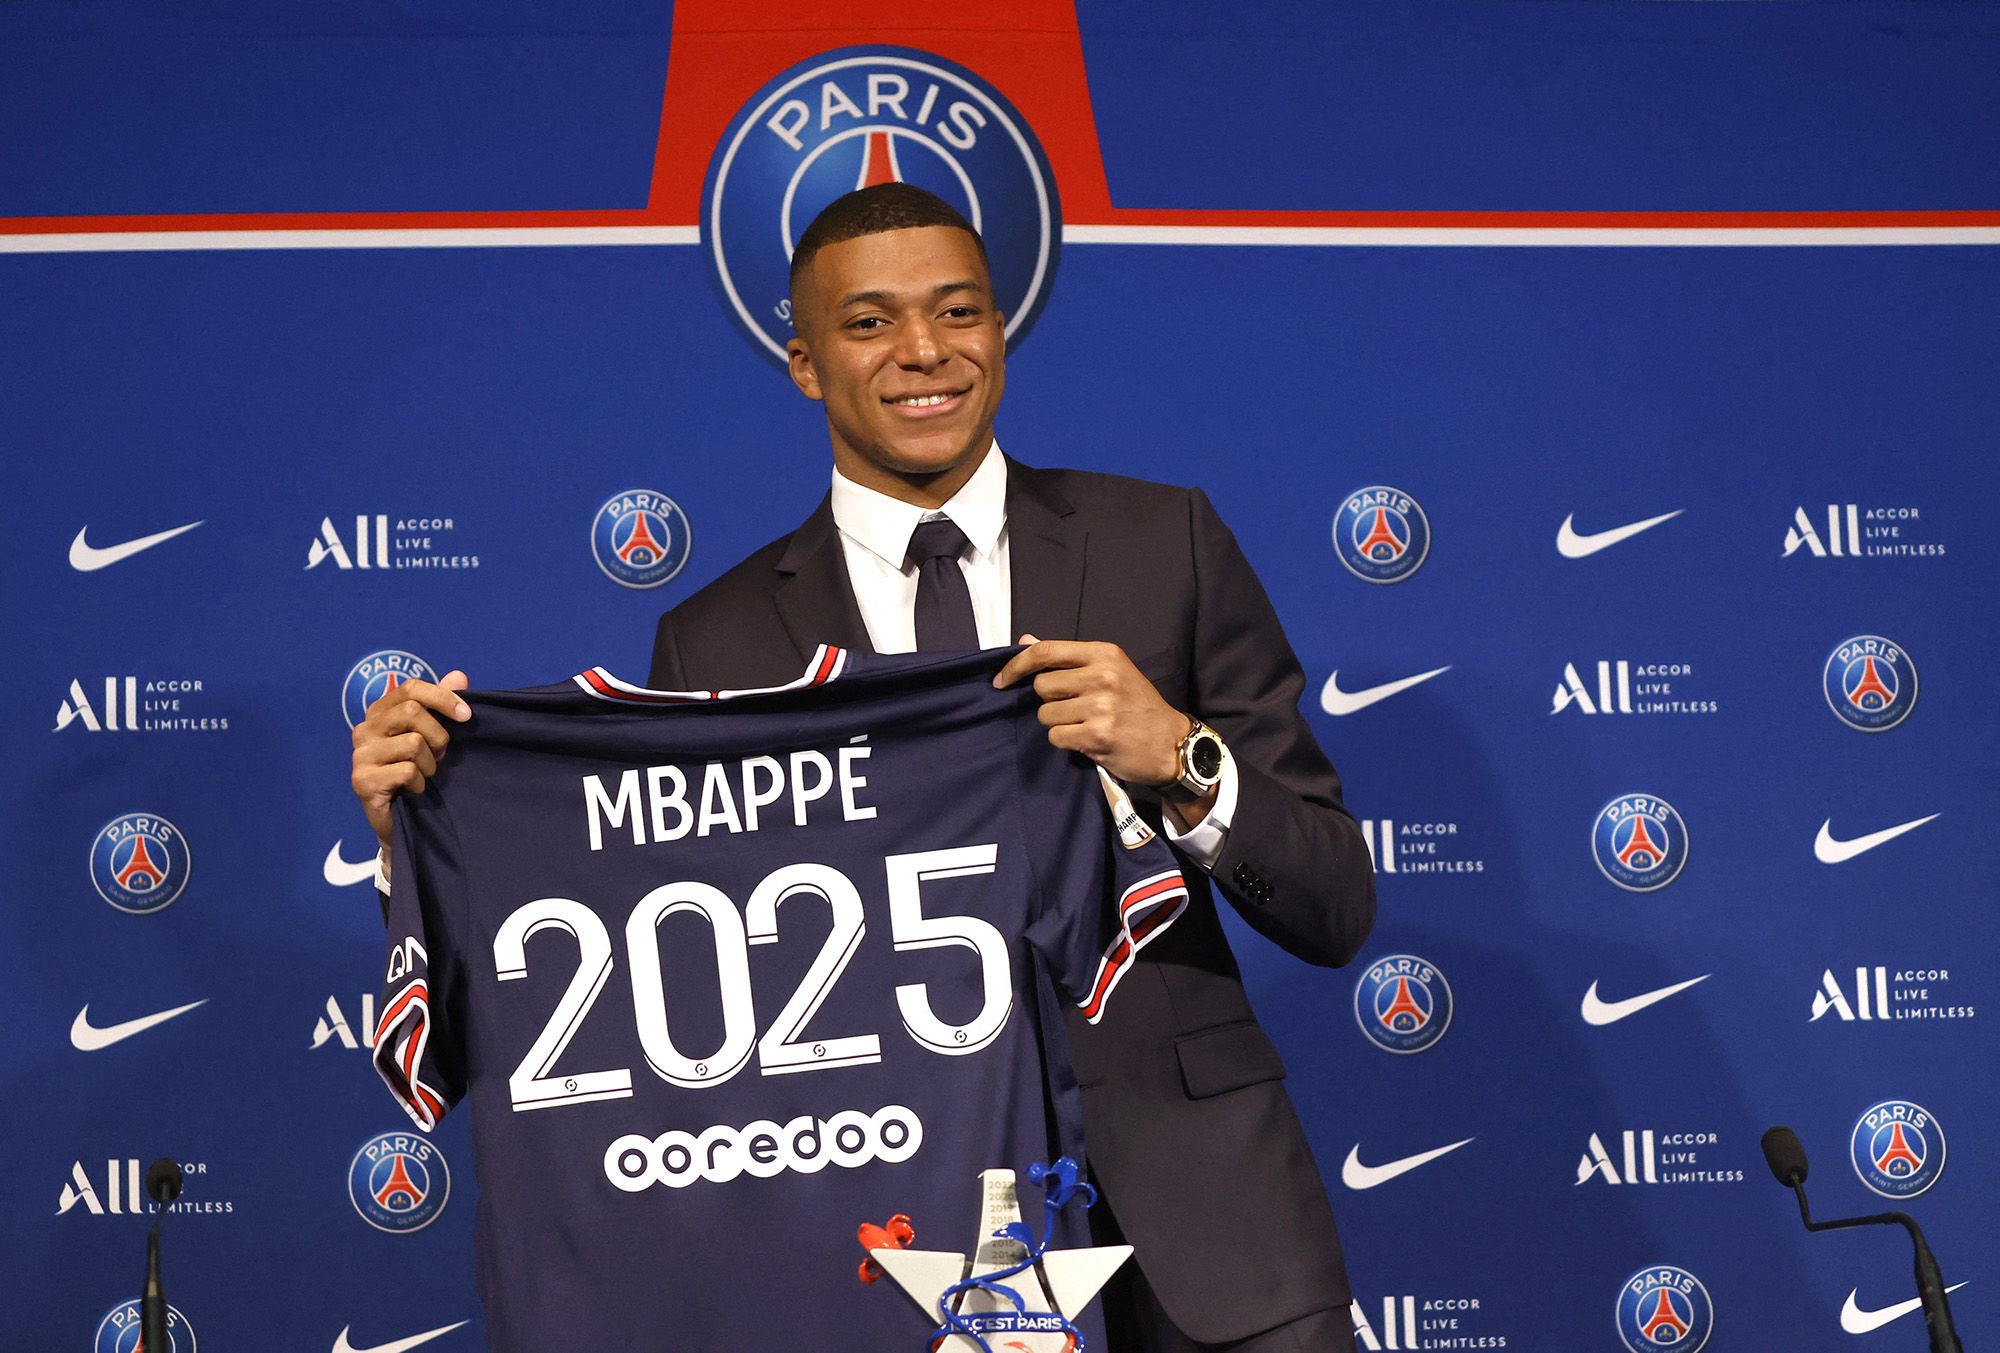 PSG's reasoning for keeping Kylian Mbappe on the sidelines